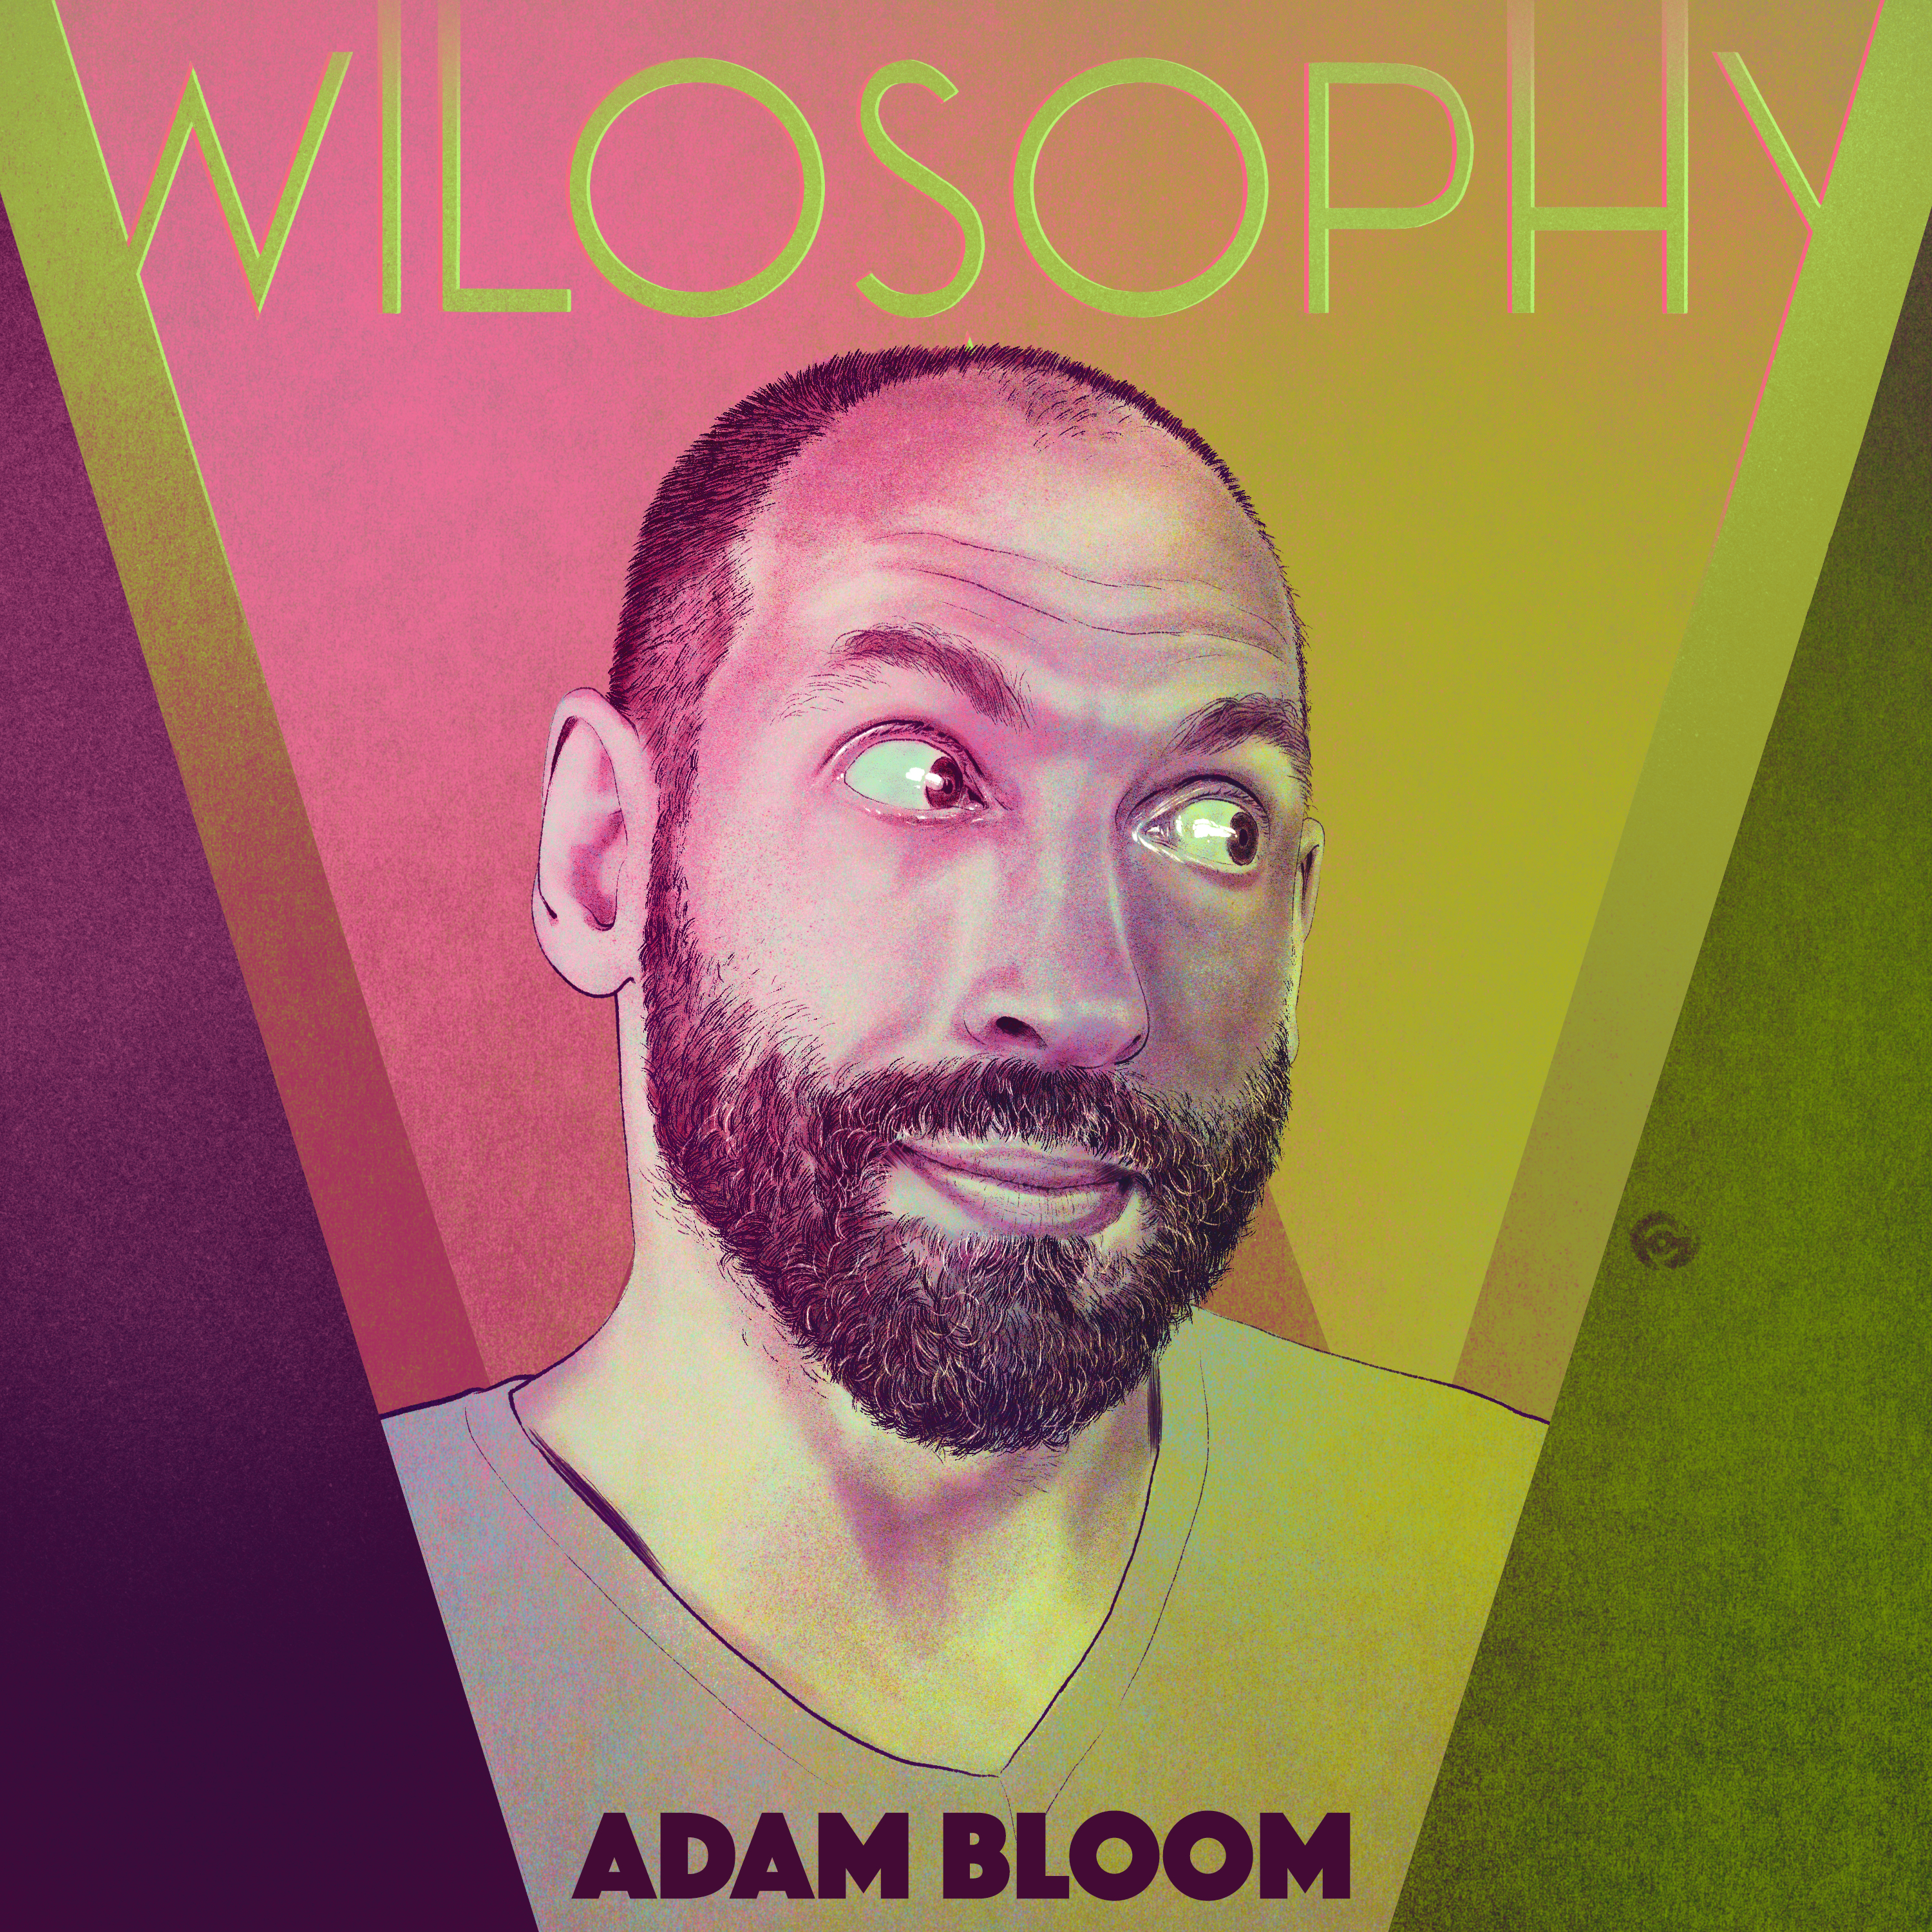 WILOSOPHY: Adam Bloom - You Don’t Know What You’ve Got Til It’s Gone